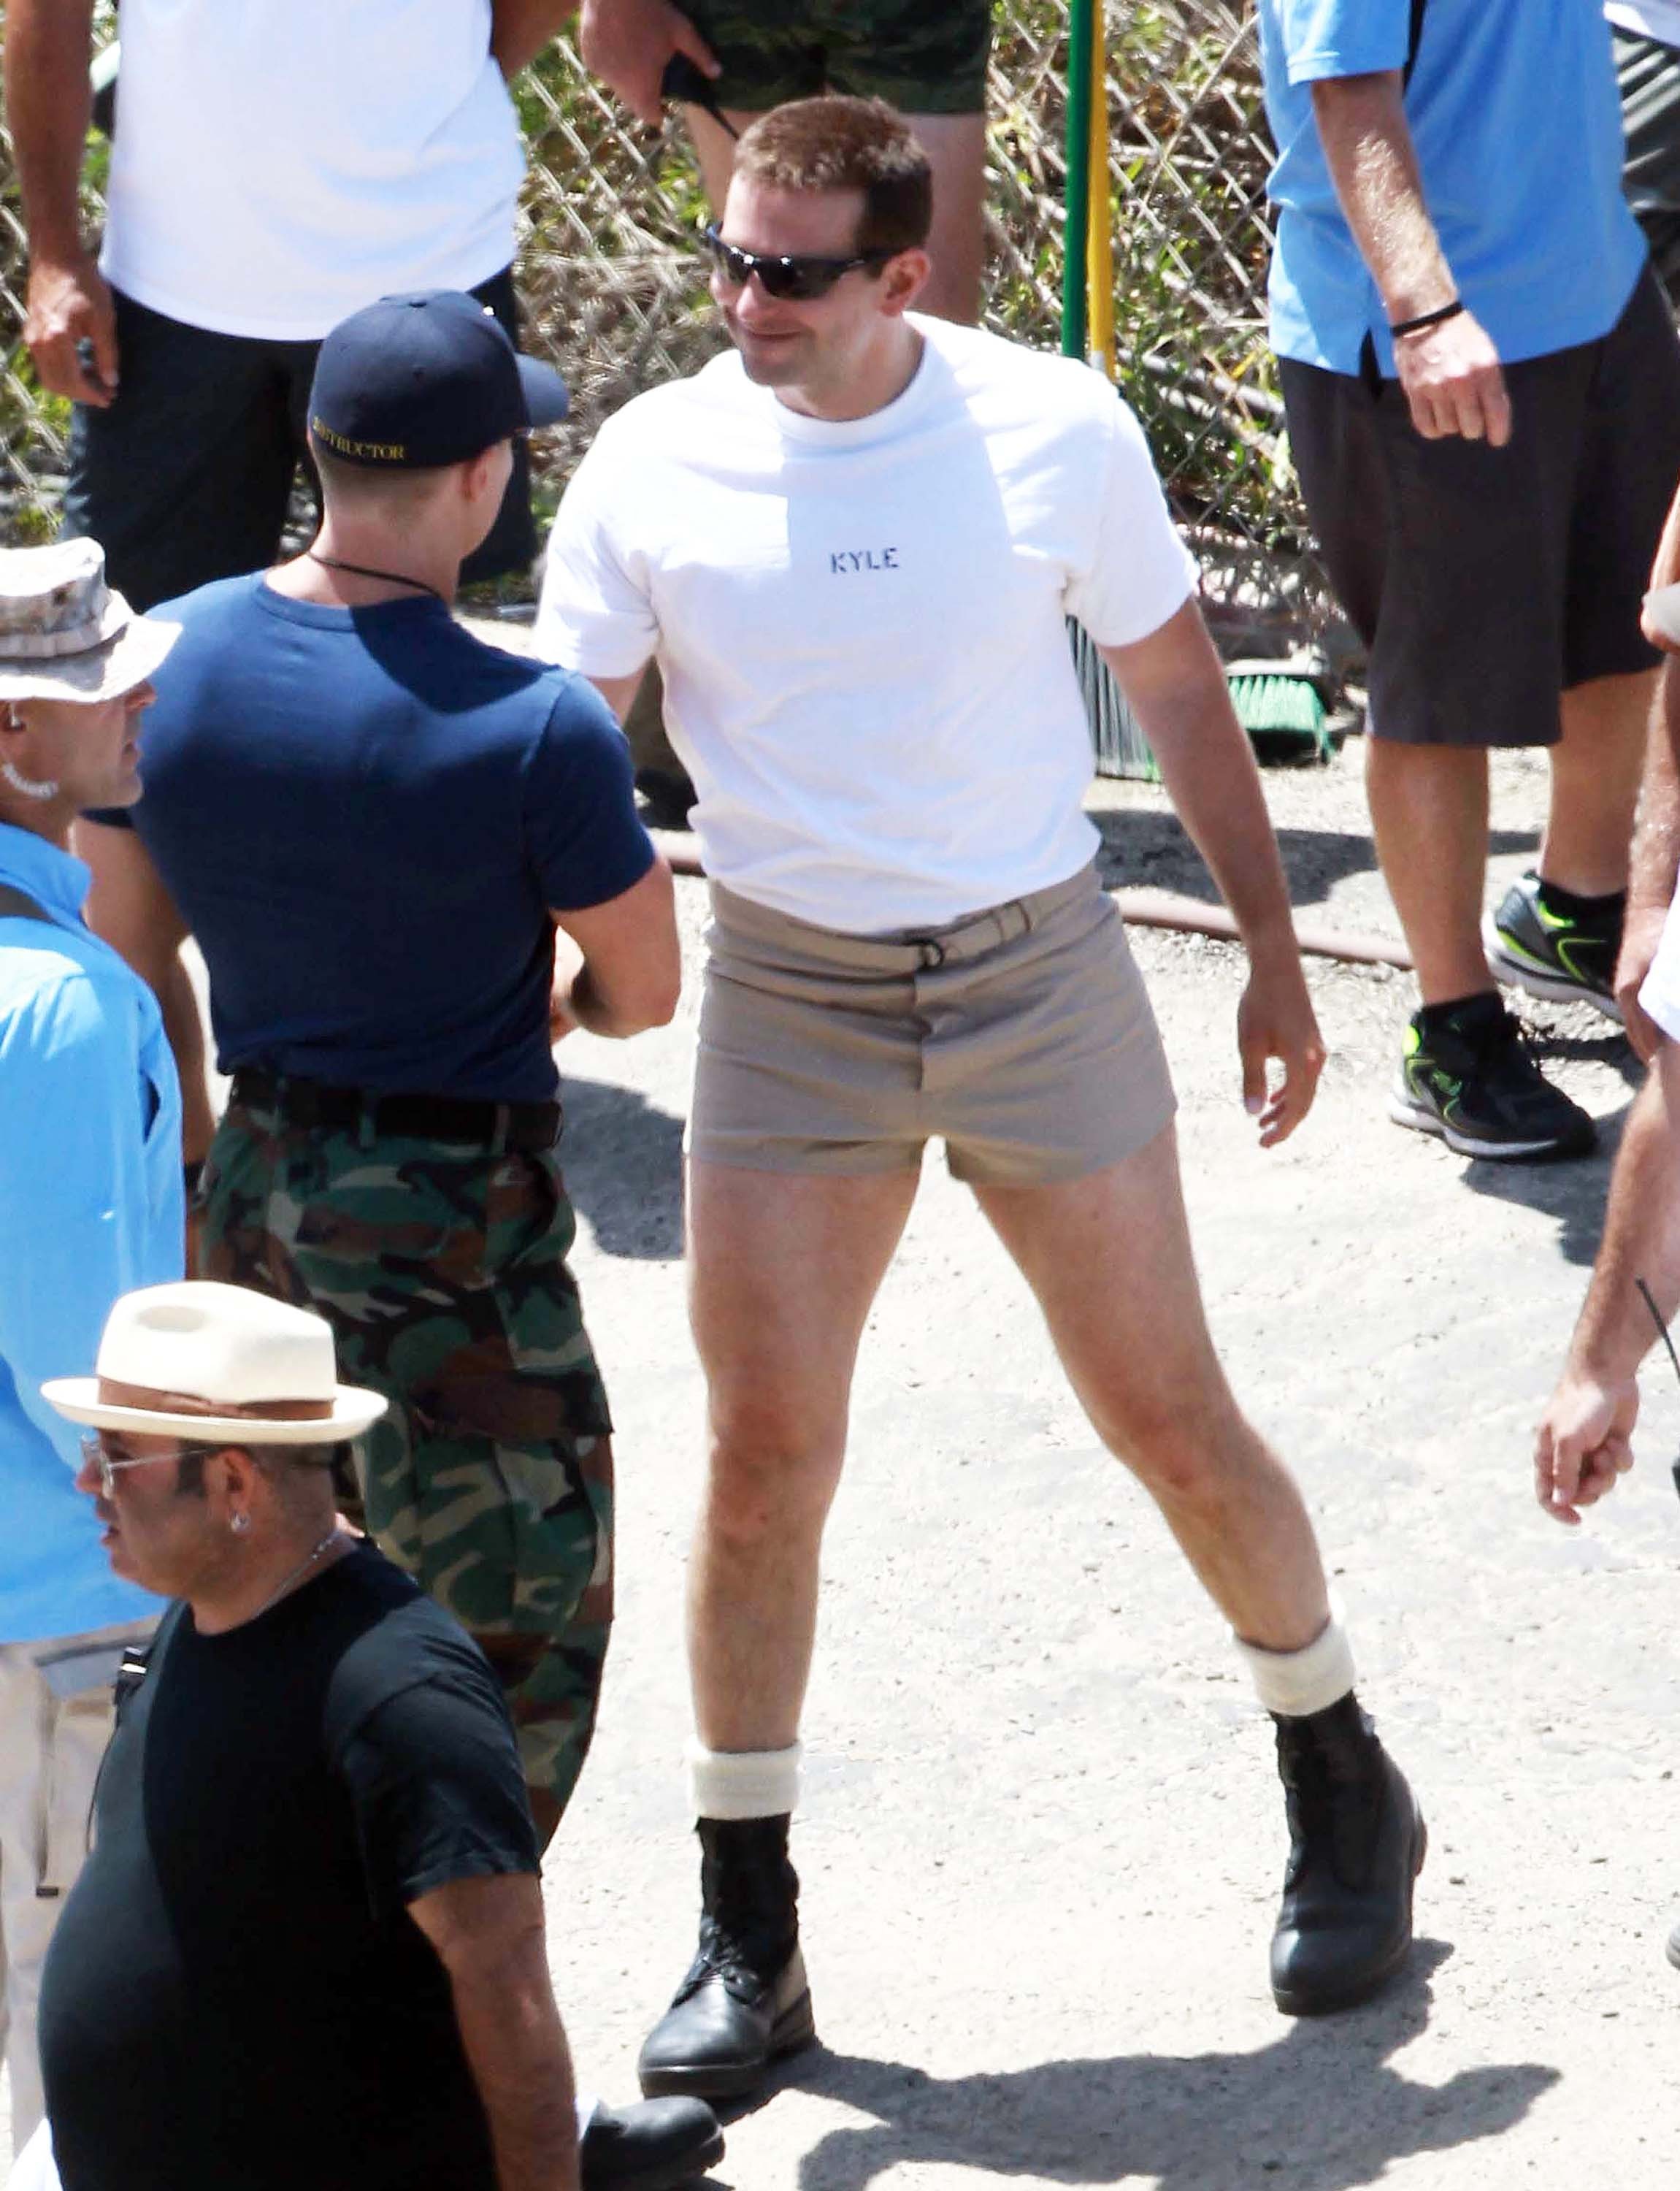 Bradley Cooper's Shorts Seriously Couldn't Be Shorter | HuffPost